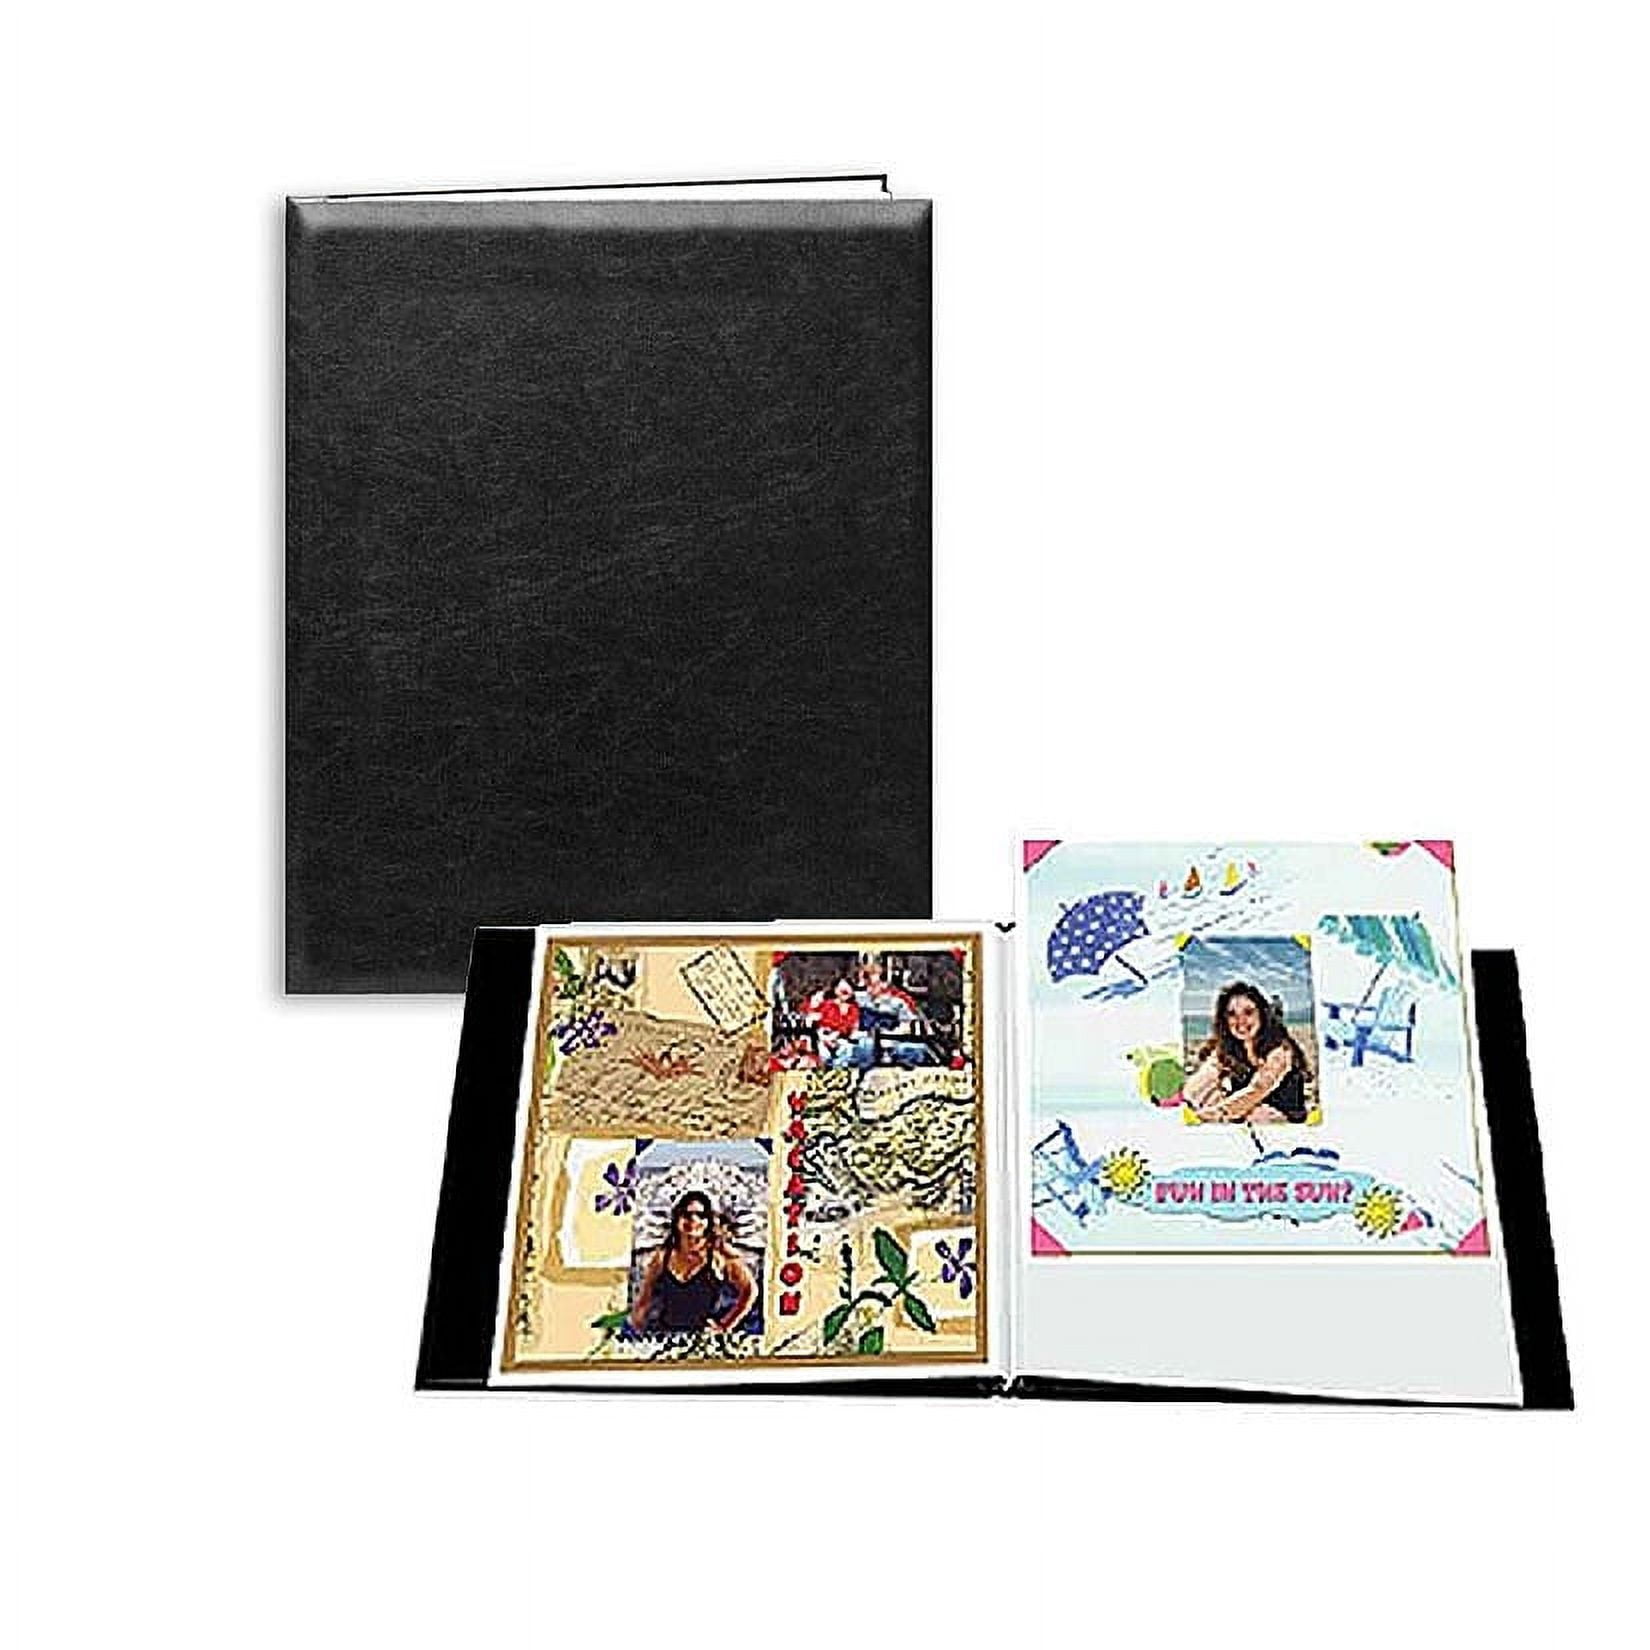 Bastex Small Scrapbook. Kraft Hardcover Photo Album, Fits 4x6 inch Photos. Perfect for DIY Hand Made Scrap Booking, Our Adventure Book, Memory Albums